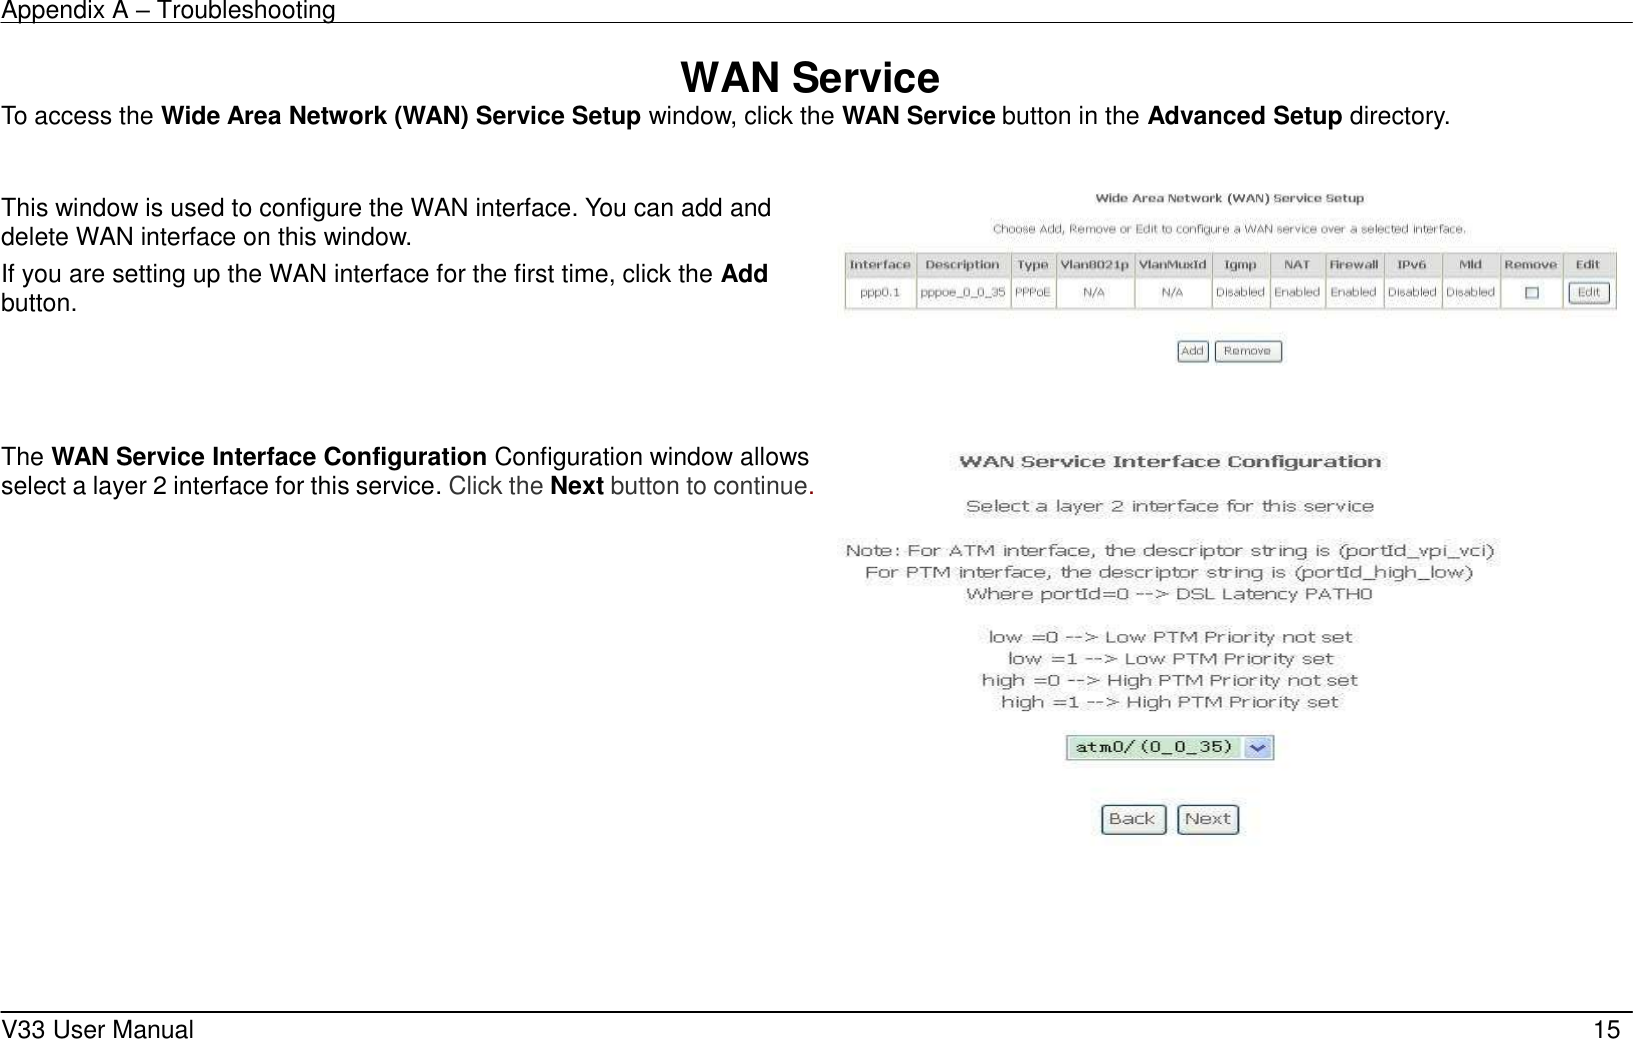 Appendix A – Troubleshooting    V33 User Manual   15 WAN Service To access the Wide Area Network (WAN) Service Setup window, click the WAN Service button in the Advanced Setup directory.  This window is used to configure the WAN interface. You can add and delete WAN interface on this window.   If you are setting up the WAN interface for the first time, click the Add button.       The WAN Service Interface Configuration Configuration window allows select a layer 2 interface for this service. Click the Next button to continue.         